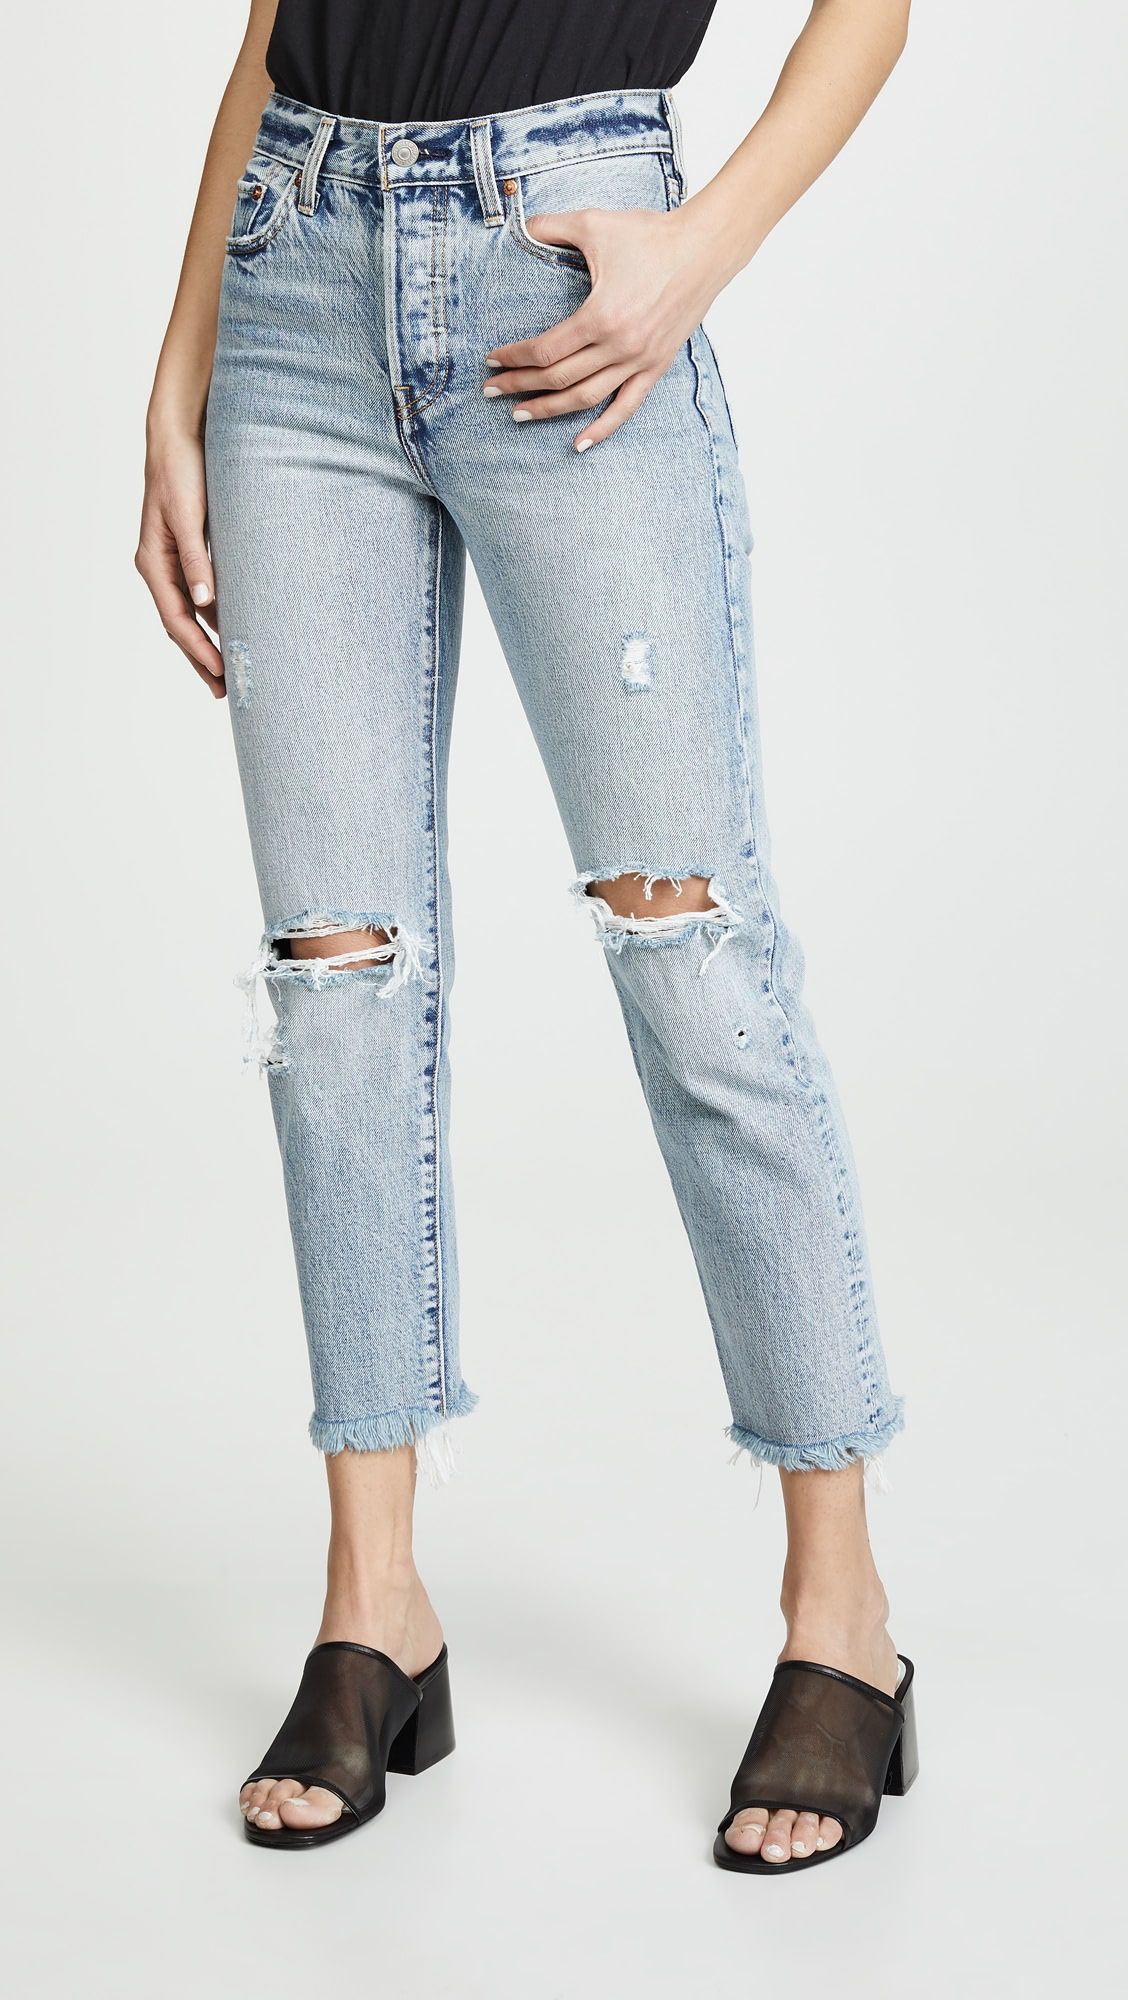 Wedgie Selvedge Straight Jeans | Shopbop